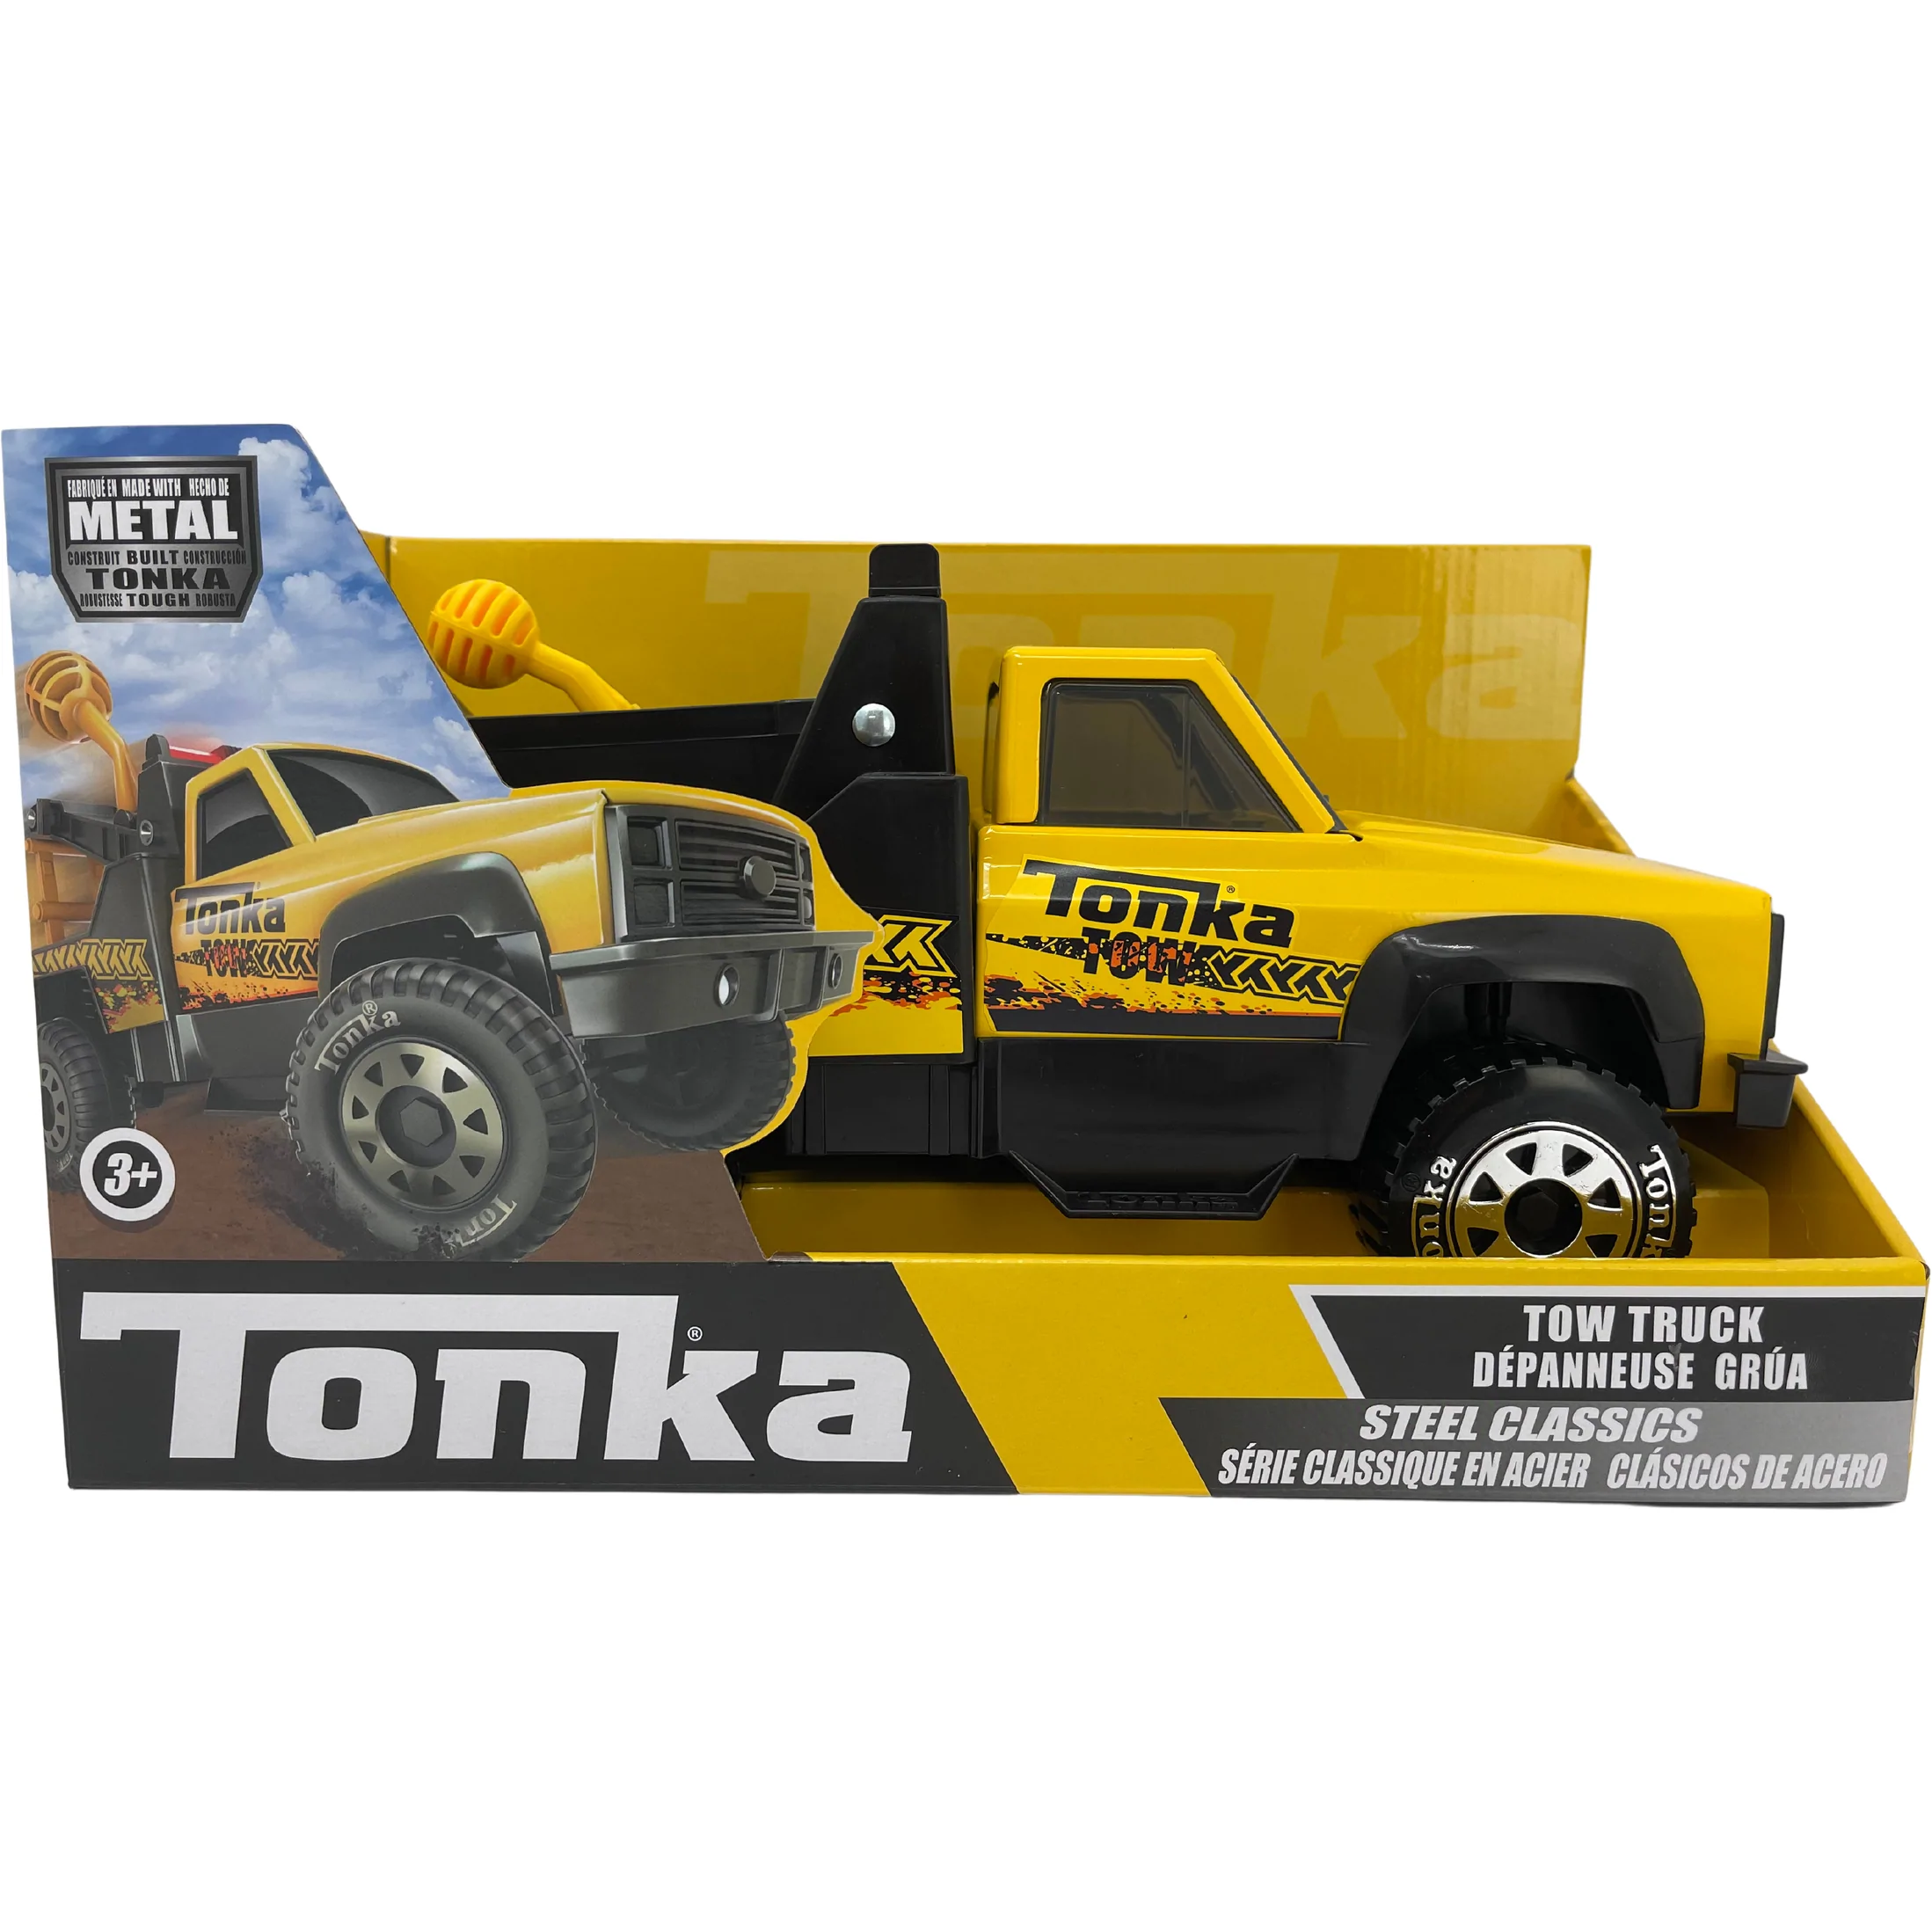 Tonka Metal Tow Truck Toy / Yellow & Black / Steel Classics / Road Side Assistance